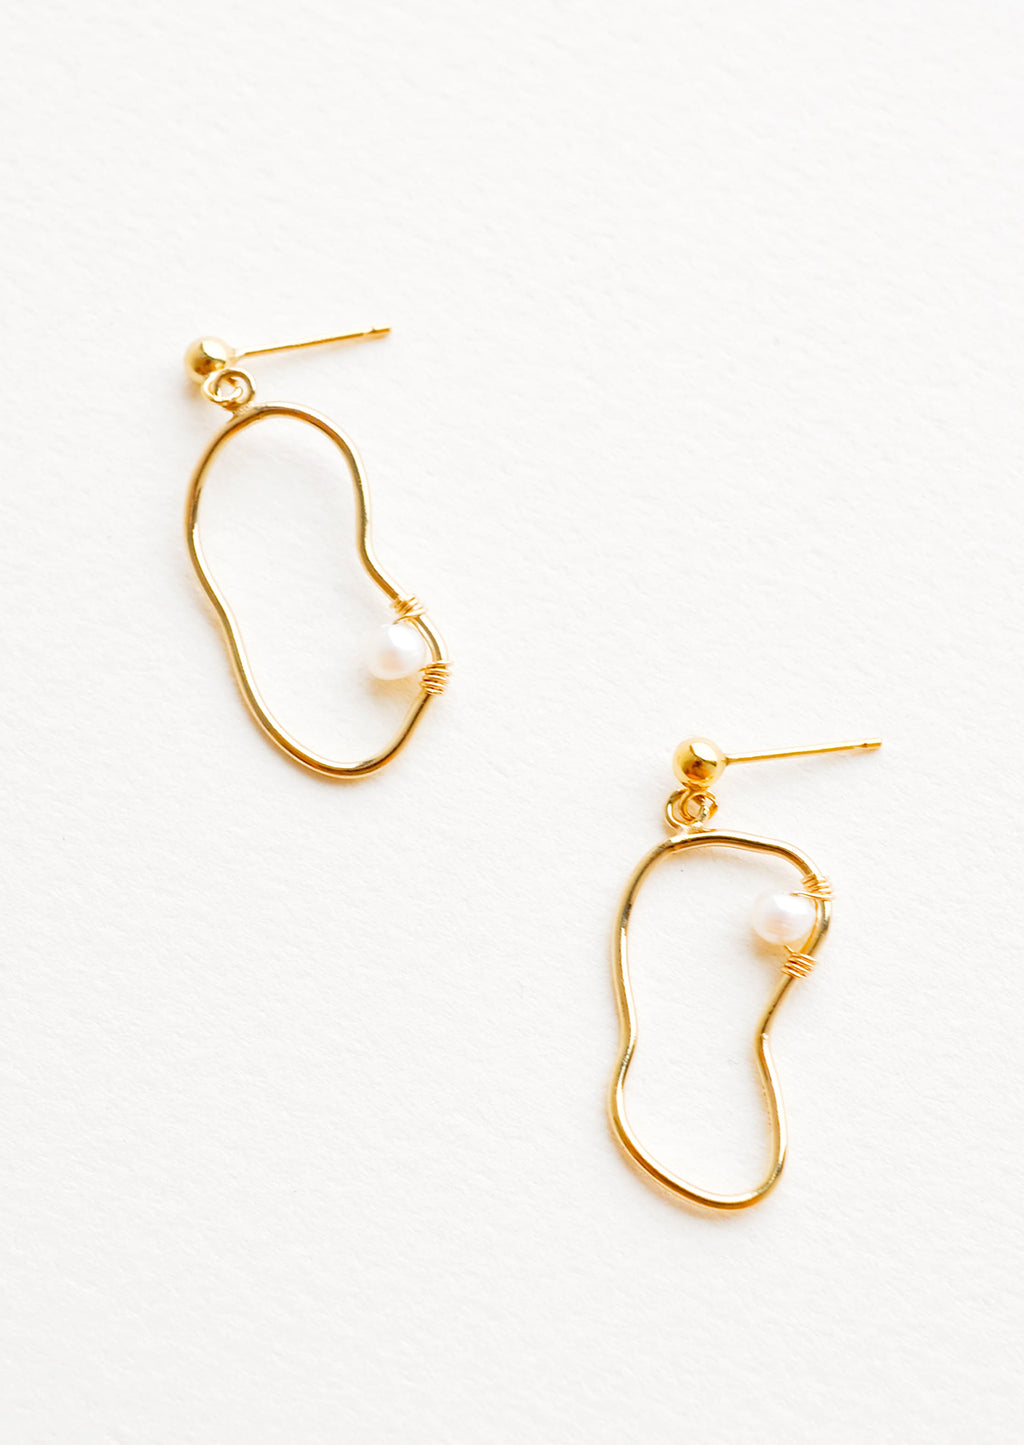 1: Dangling earrings featuring asymmetric round gold charm made from a slim gold hoop, with one pearl attached with wrapped wire.